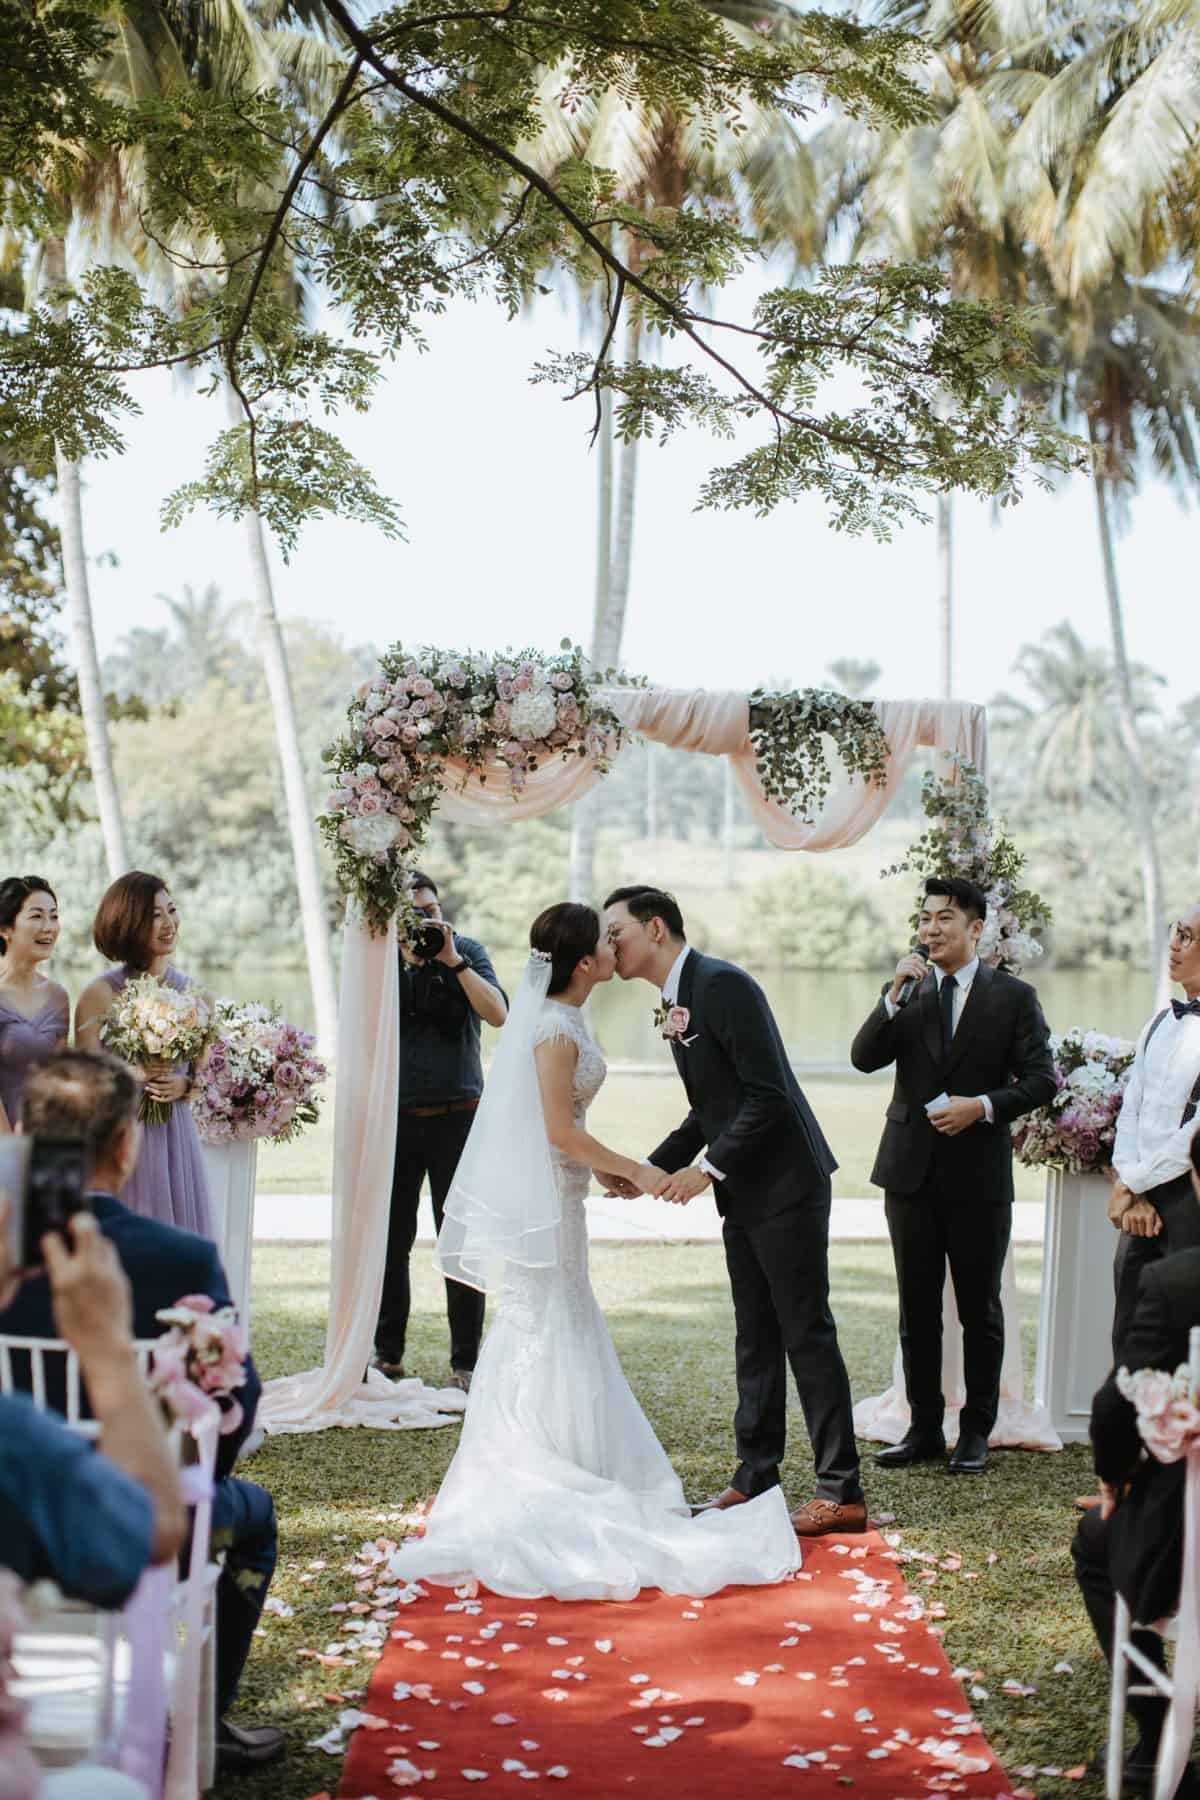 Garden Romantic Rustic Rosy Golden Wedding at The Saujana Hotel Subang Kuala Lumpur malaysia cliff choong the cross effects kevin tan destination portrait and wedding photographer malaysia kuala lumpur bride and groom couple kiss romantic intimate moment scene exchanging Rings 